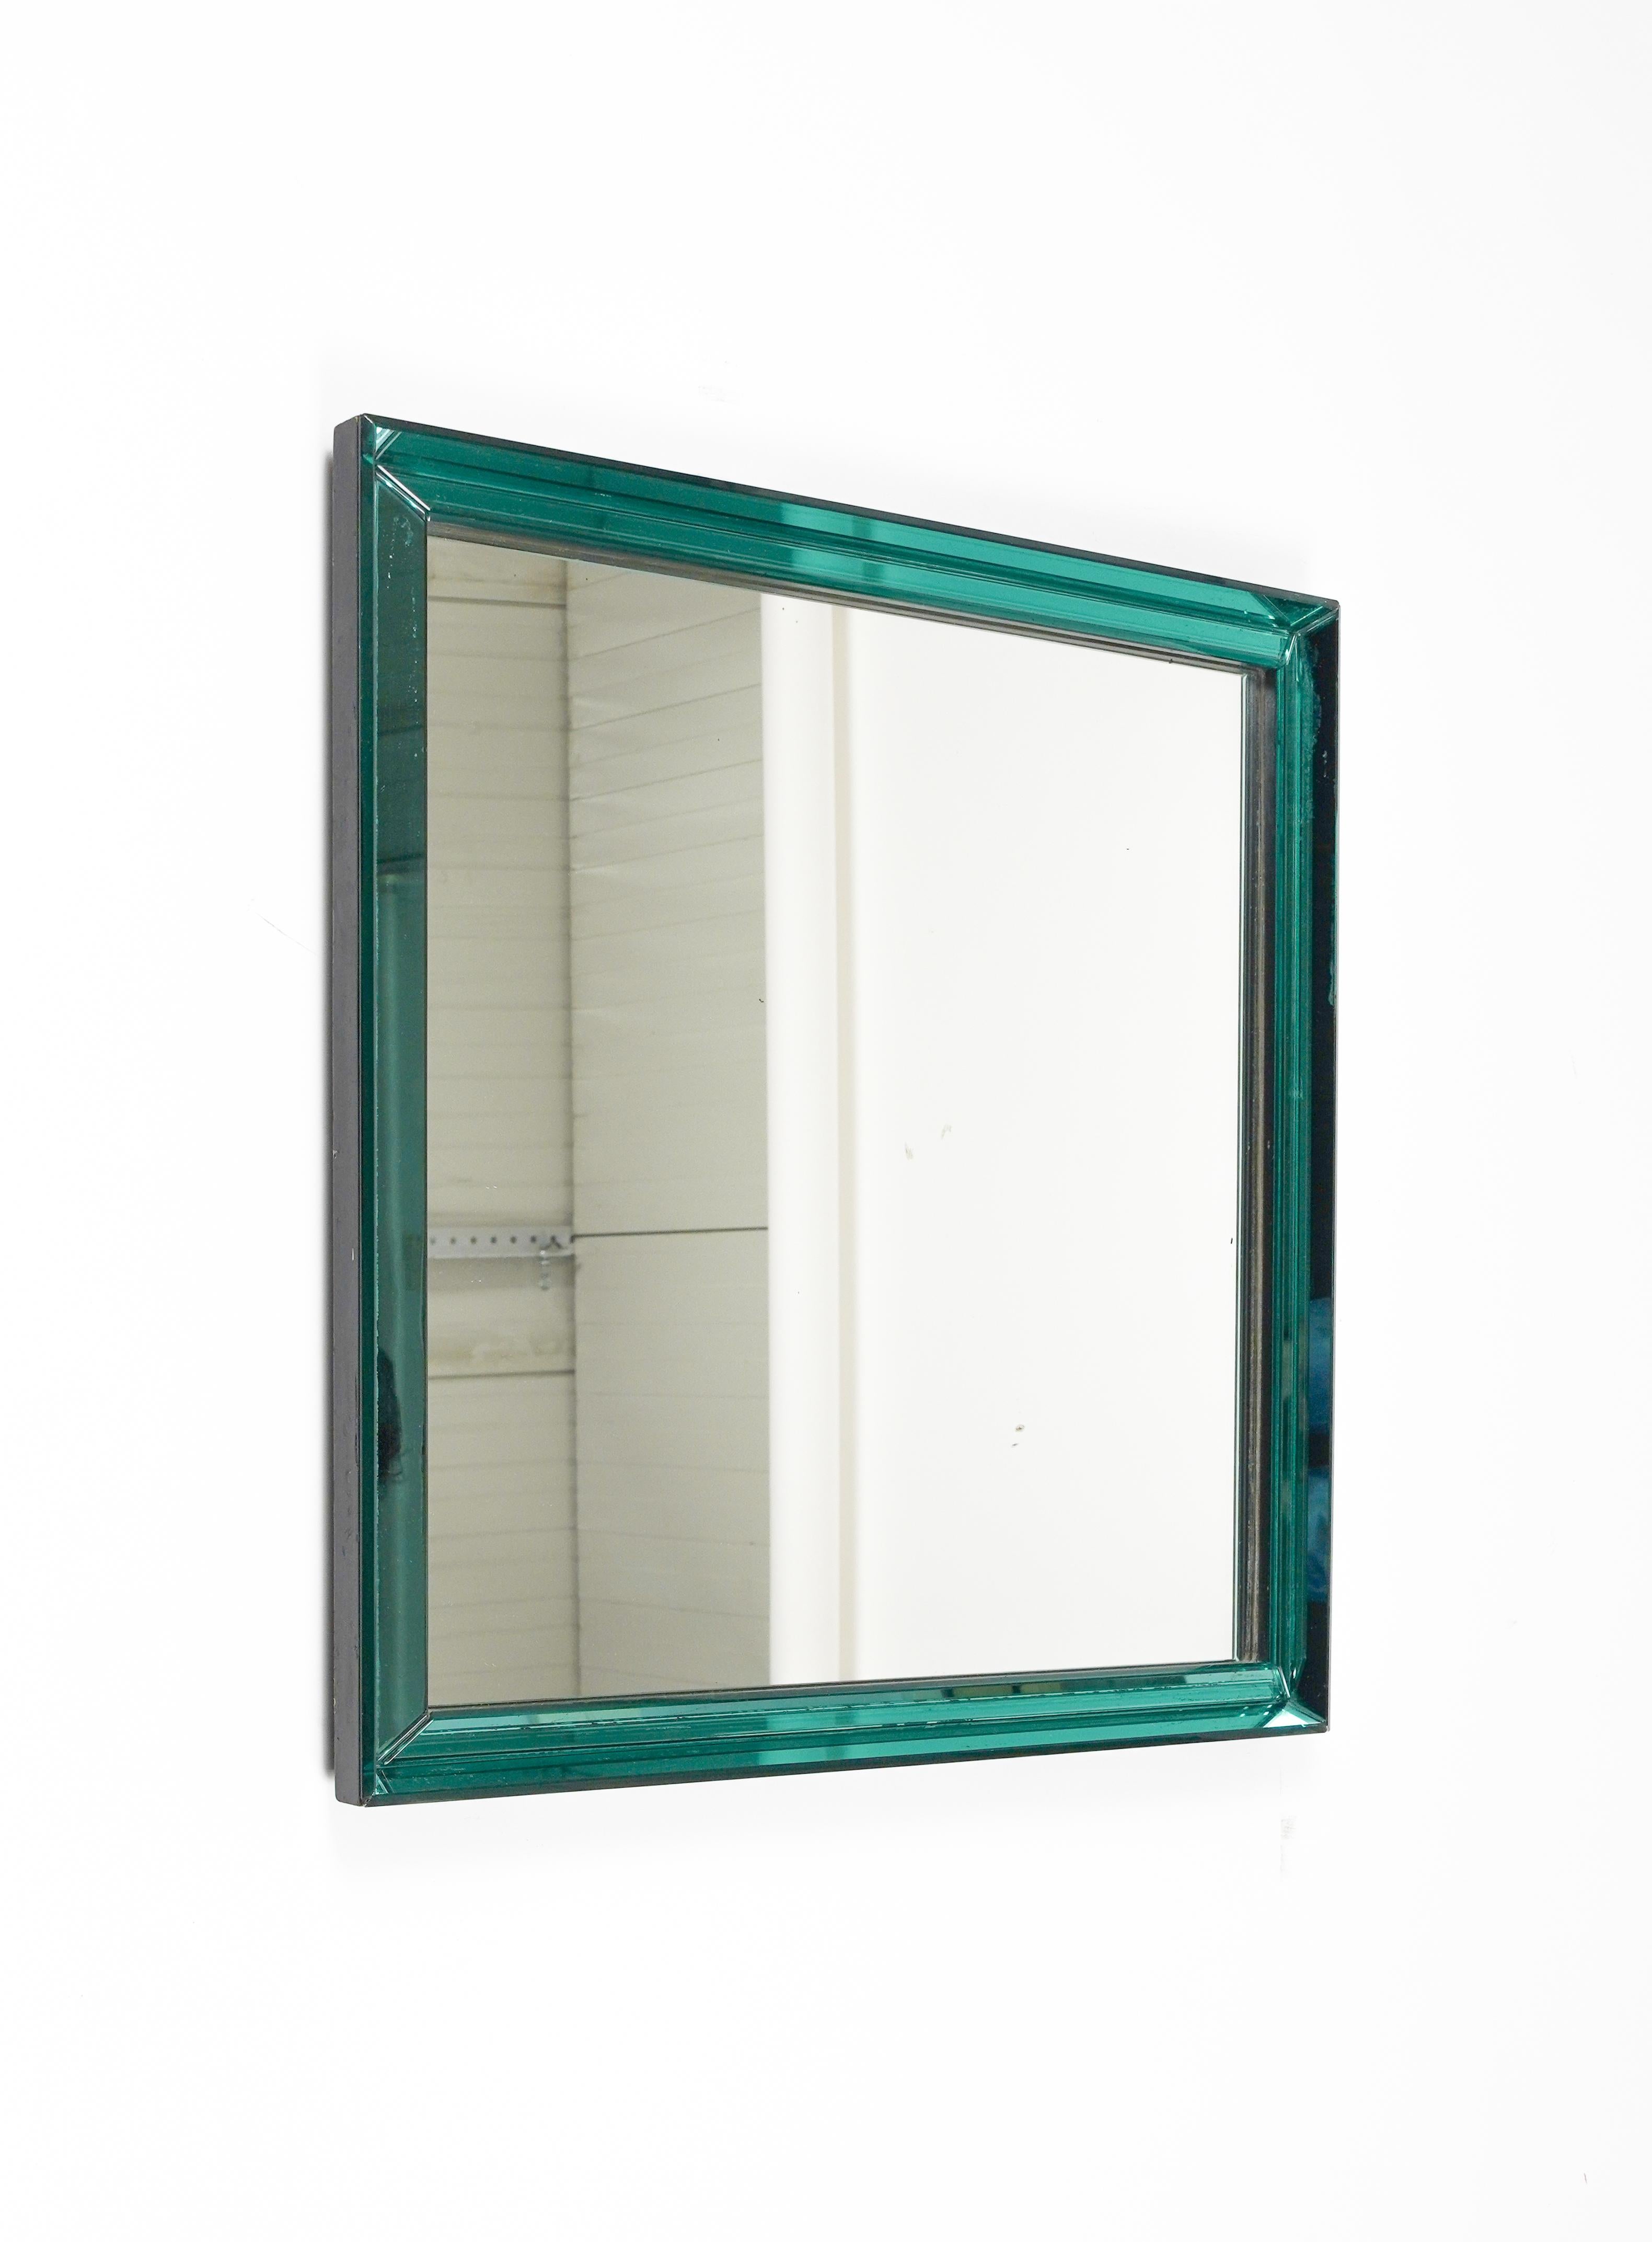 Midcentury Squared Wall Mirror by Max Ingrand for Fontana Arte, Italy 1960s For Sale 6